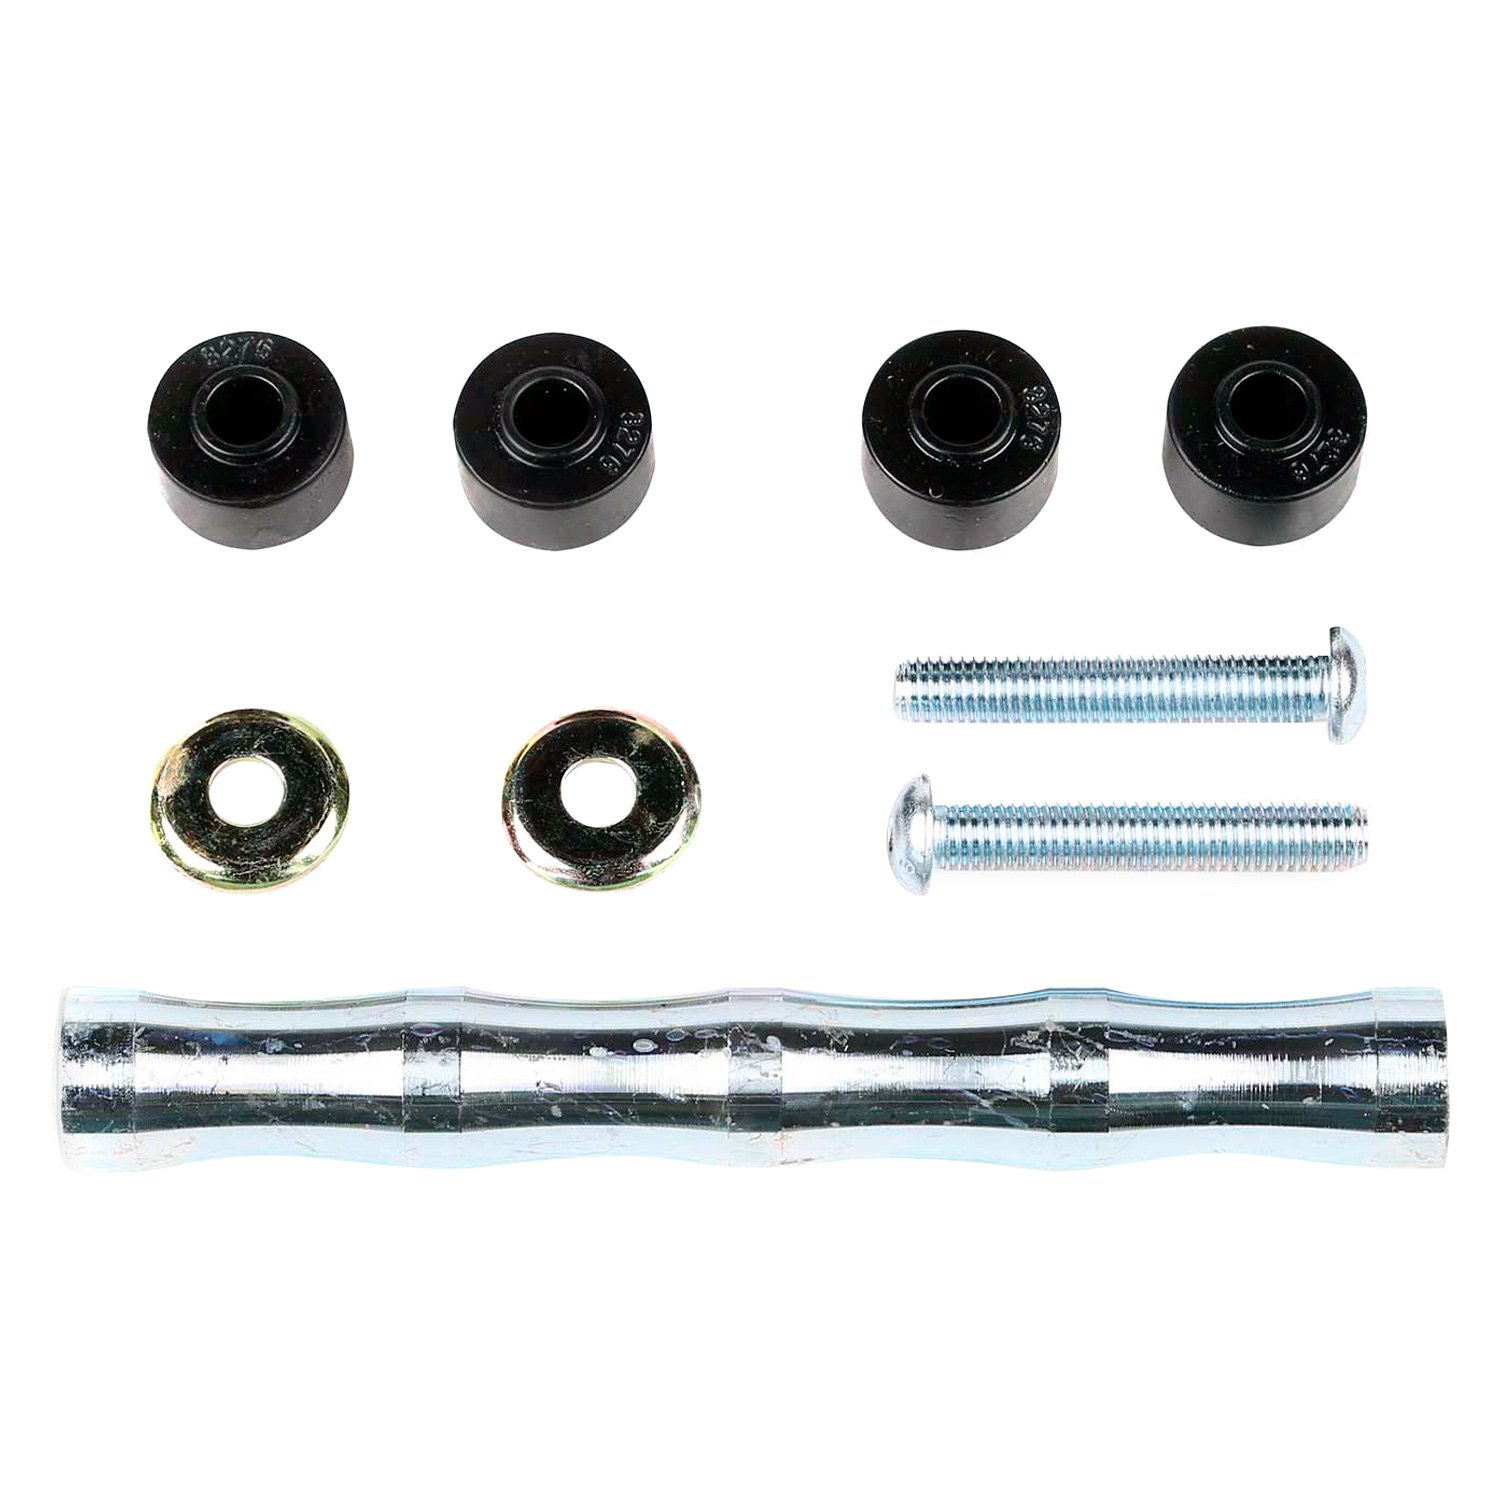 For Chevy Silverado 1500 99-06 Fabtech FTS1127 Front Sway Bar End Link Kit | eBay Sway Bar Links For 3 Inch Lift Silverado